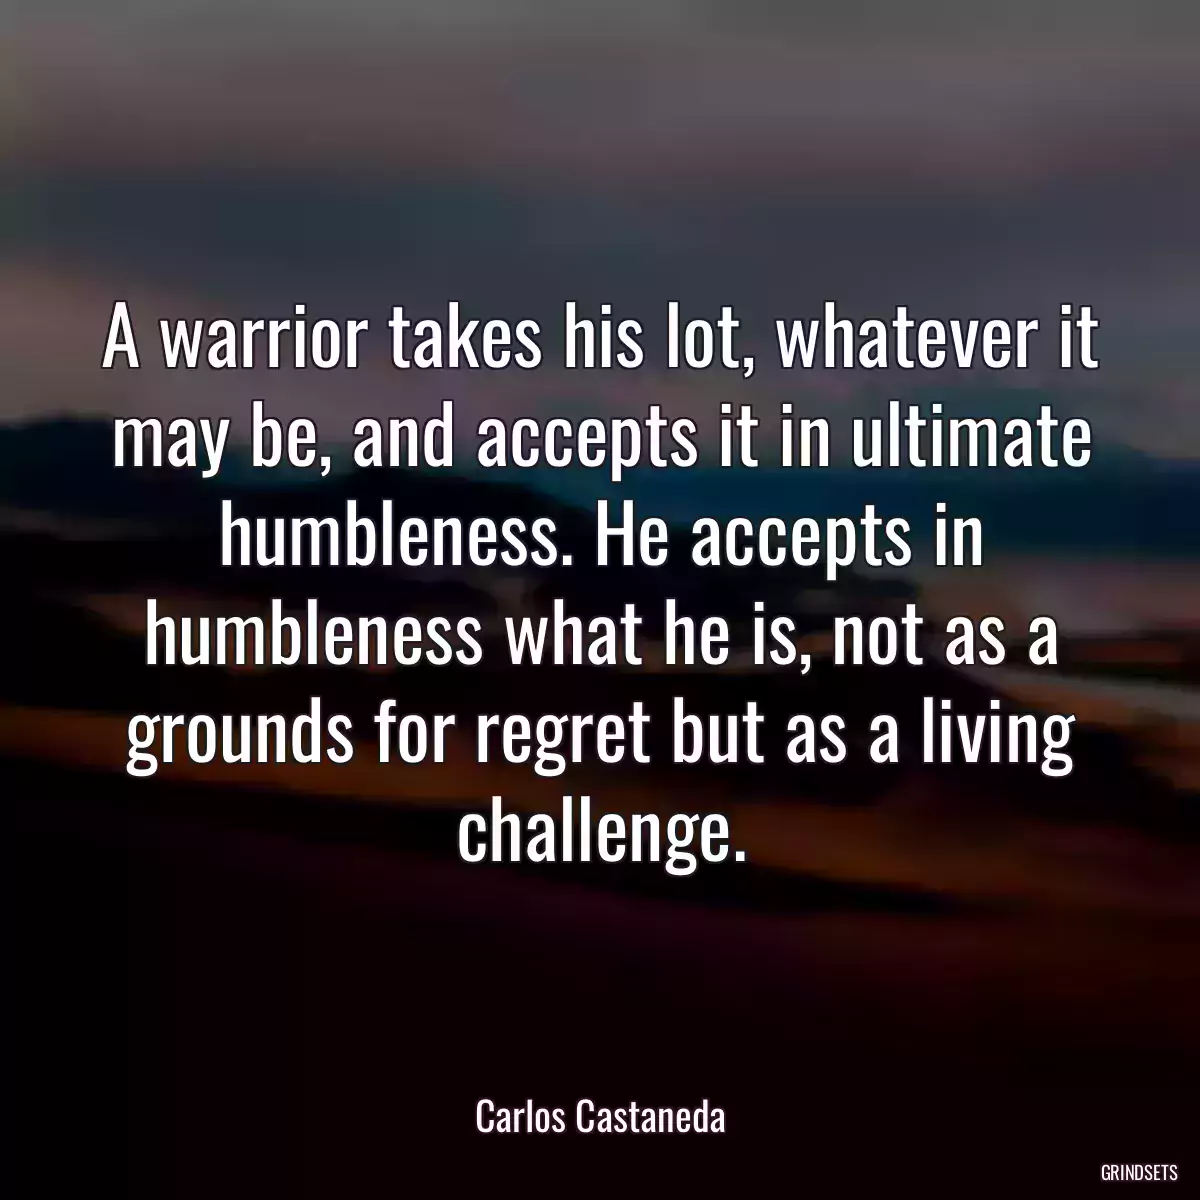 A warrior takes his lot, whatever it may be, and accepts it in ultimate humbleness. He accepts in humbleness what he is, not as a grounds for regret but as a living challenge.